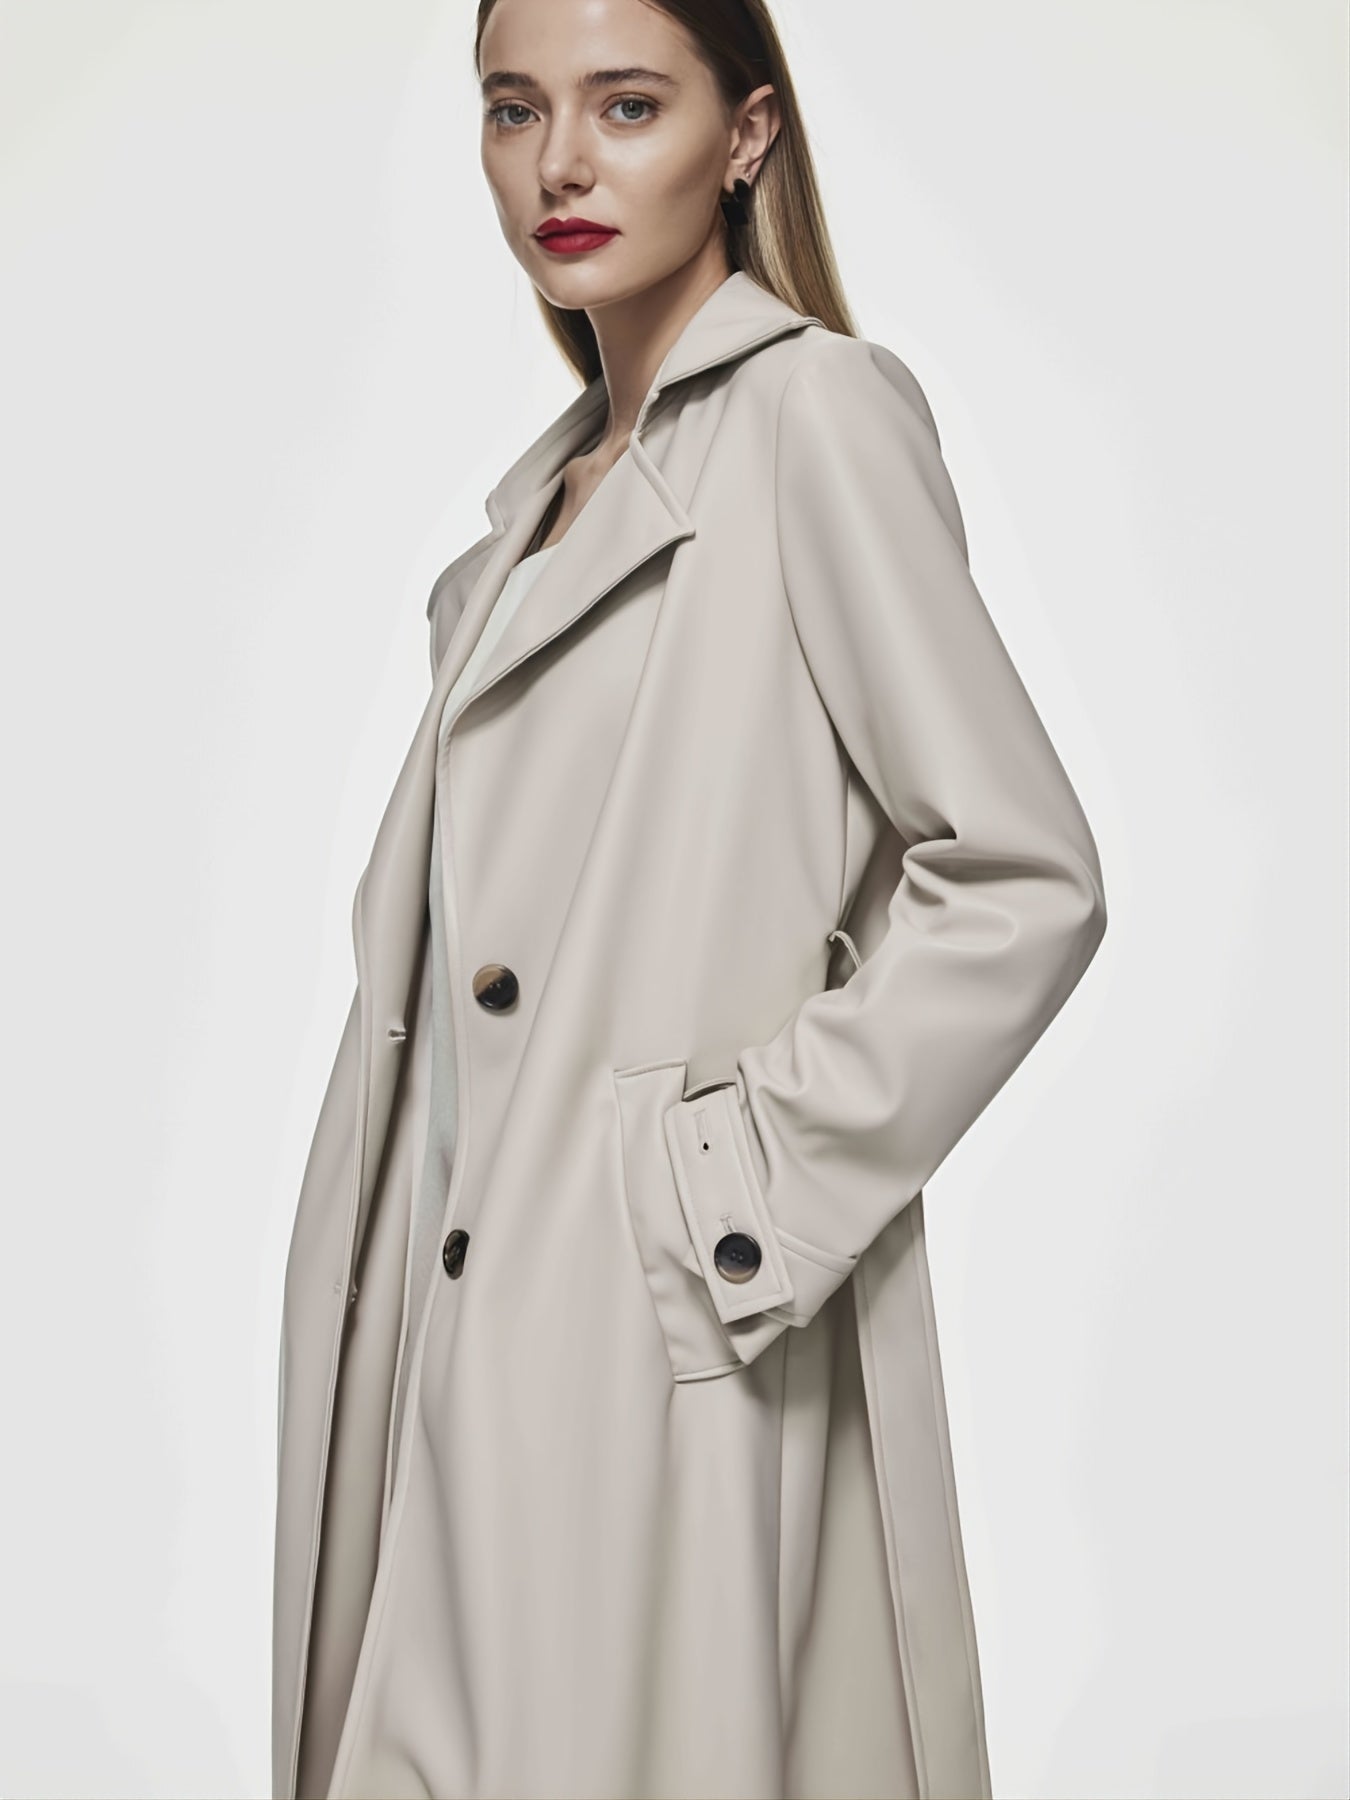 Antmvs Solid Faux Leather Double Lapel Long Sleeve Trench Coat, Fashion Fall Winter Overcoat, Women's Clothing